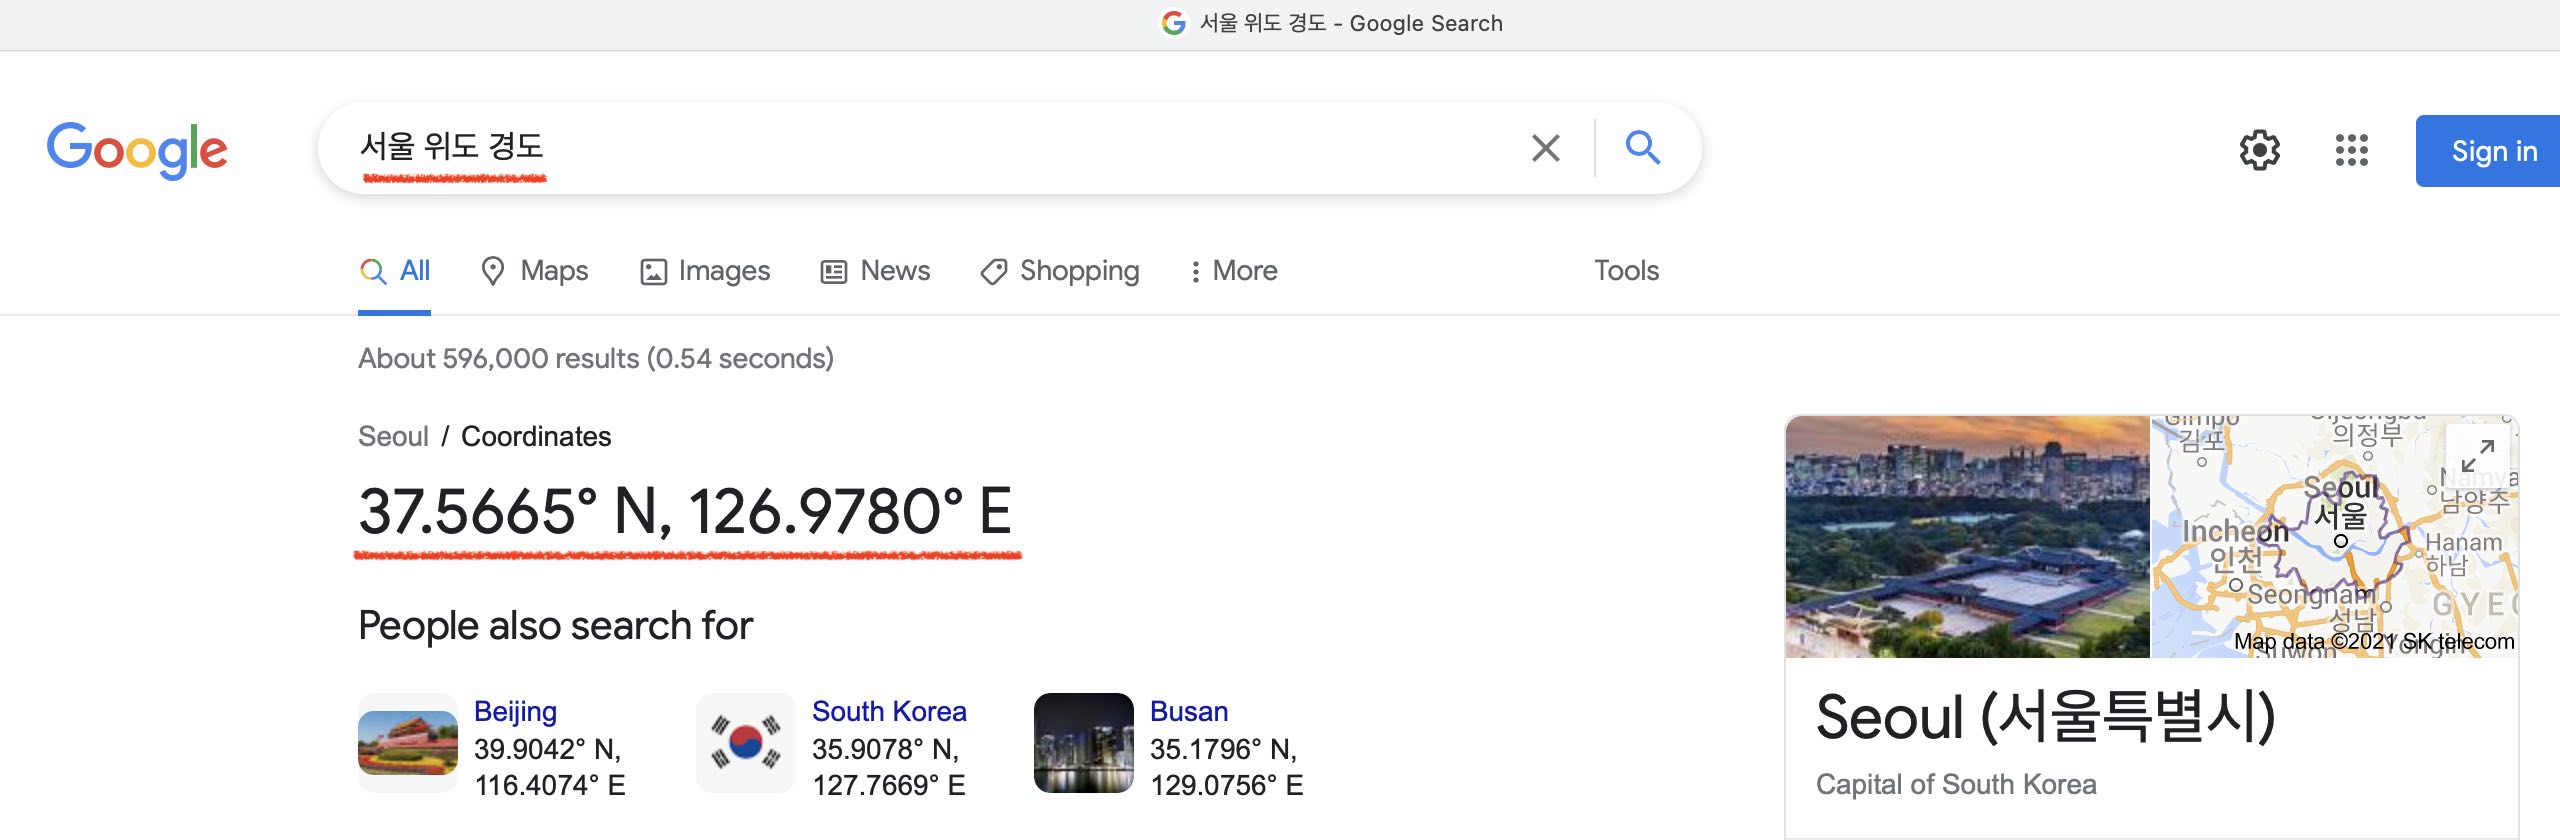 search engine result page (SERP) of Google&#44; showing results for the query : Seoul latitude longitude. Latitude and longitude of Seoul are presented in the snippet.